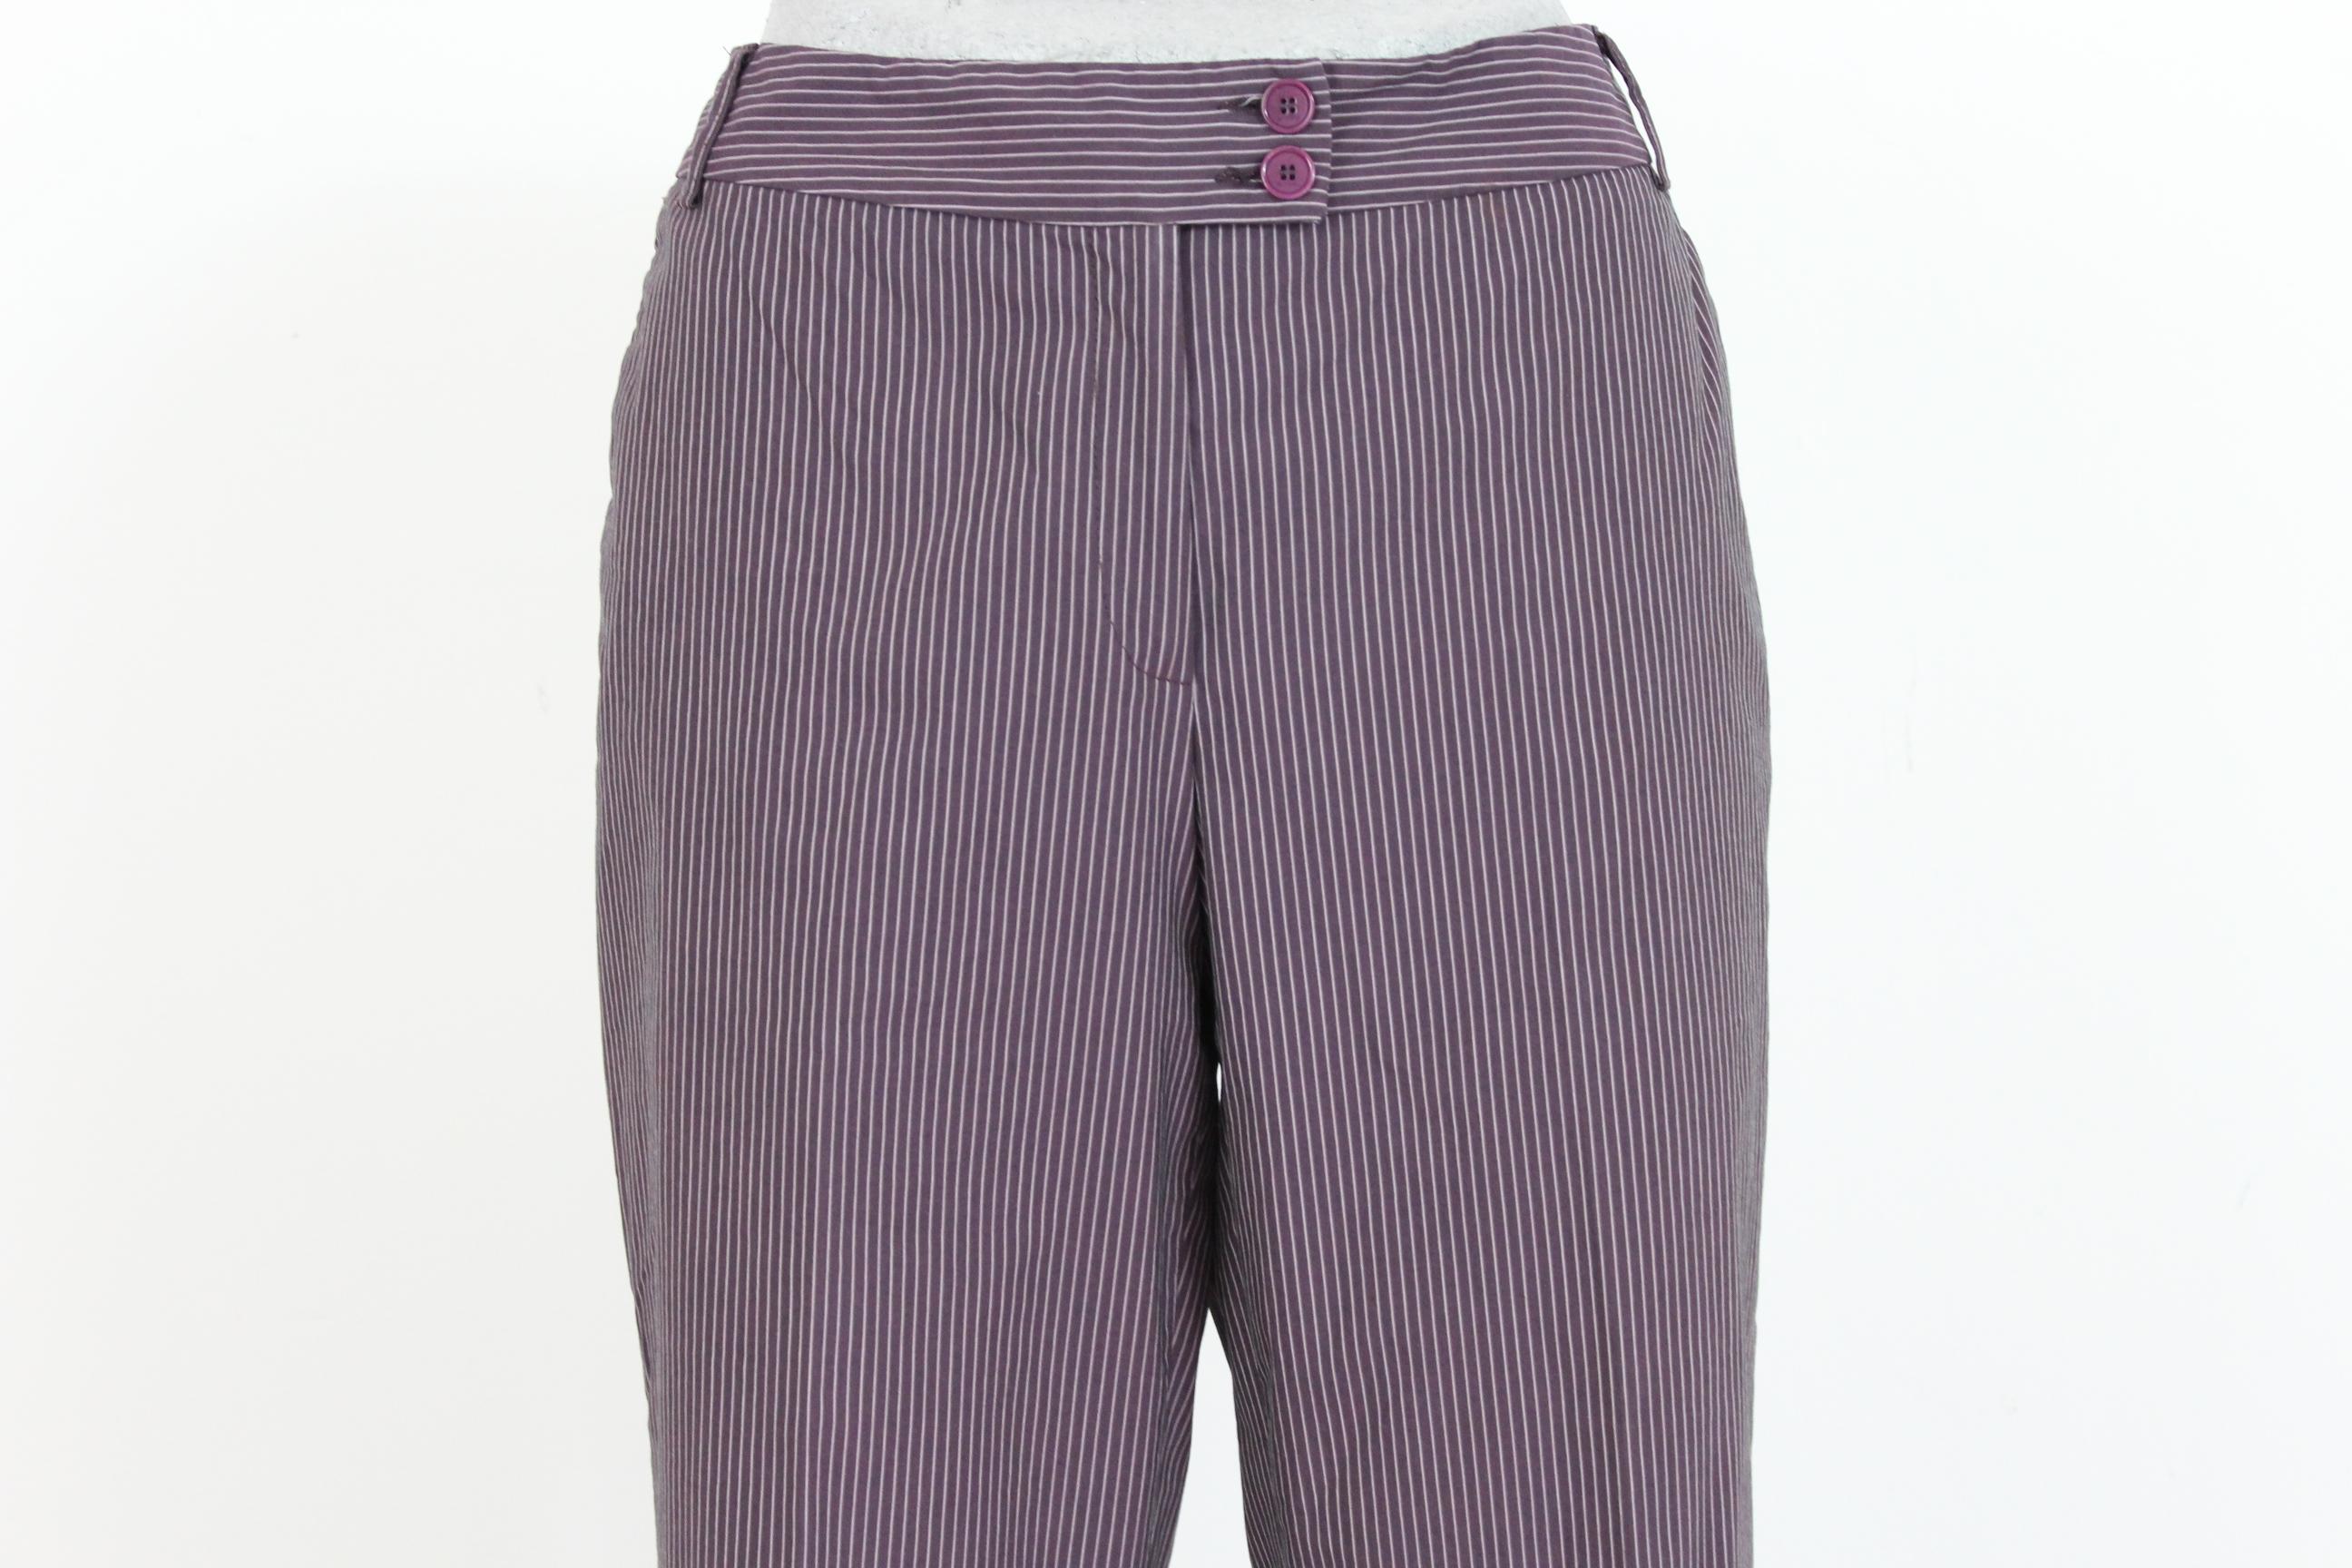 Etro 90s vintage women's trousers. Straight model, high waist, burgundy color pinstriped in pink. Zip and button closure. 65% cotton, 31% polyamide 4% elastene. Made in Italy. Excellent vintage conditions.

Size: 44 It 10 Us 12 Uk

Waist: 40